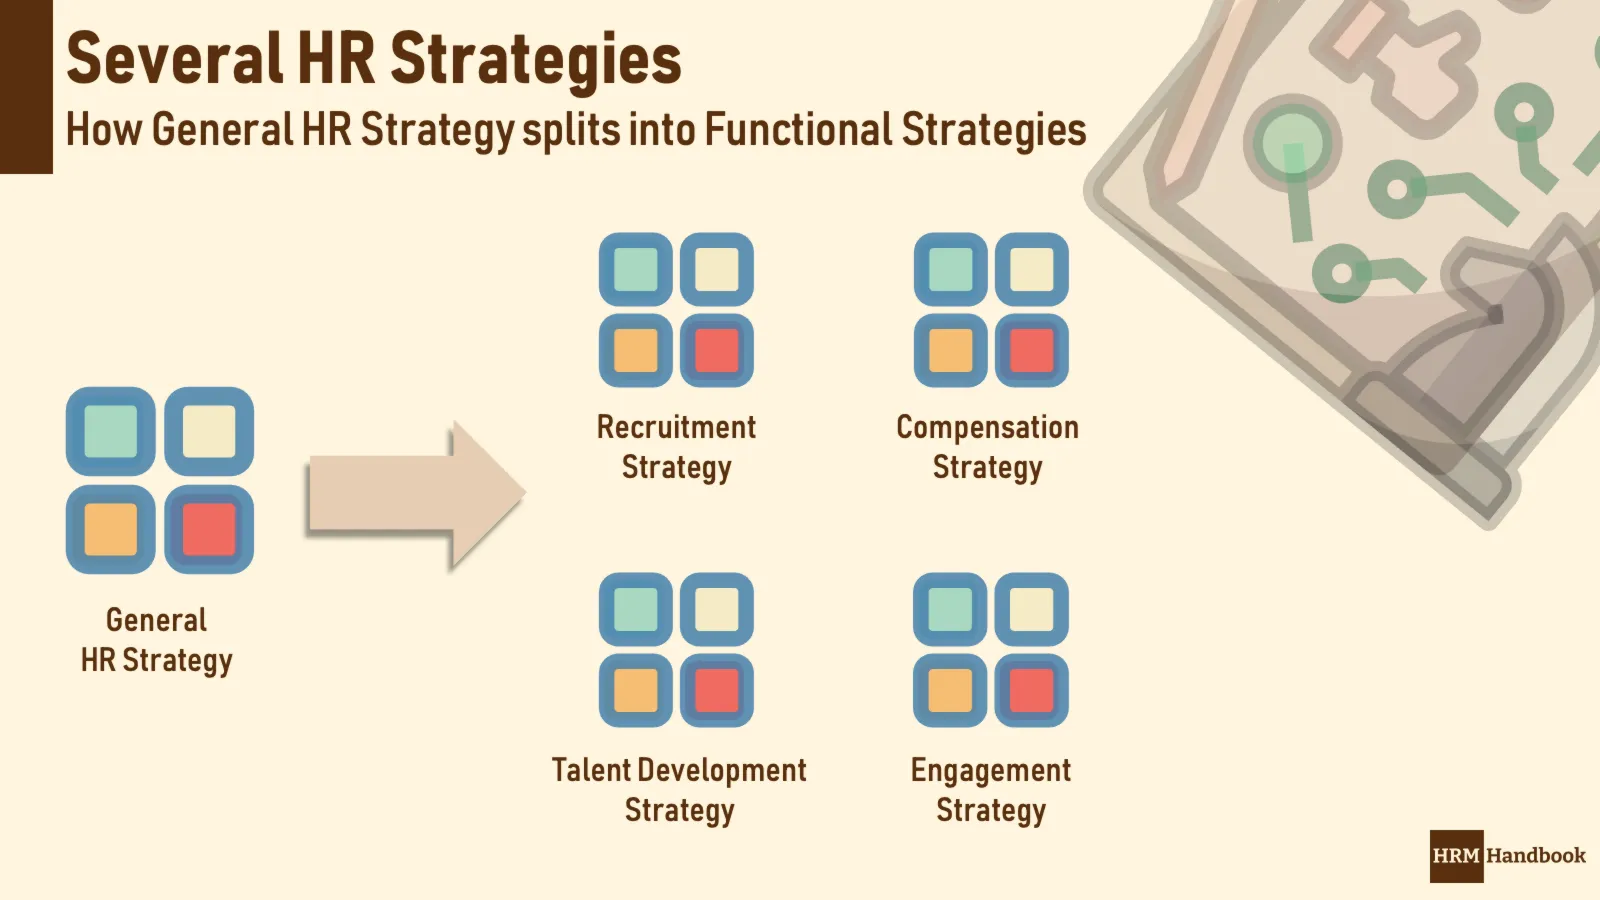 How General HR Strategy splits and influences Functional HR Strategies